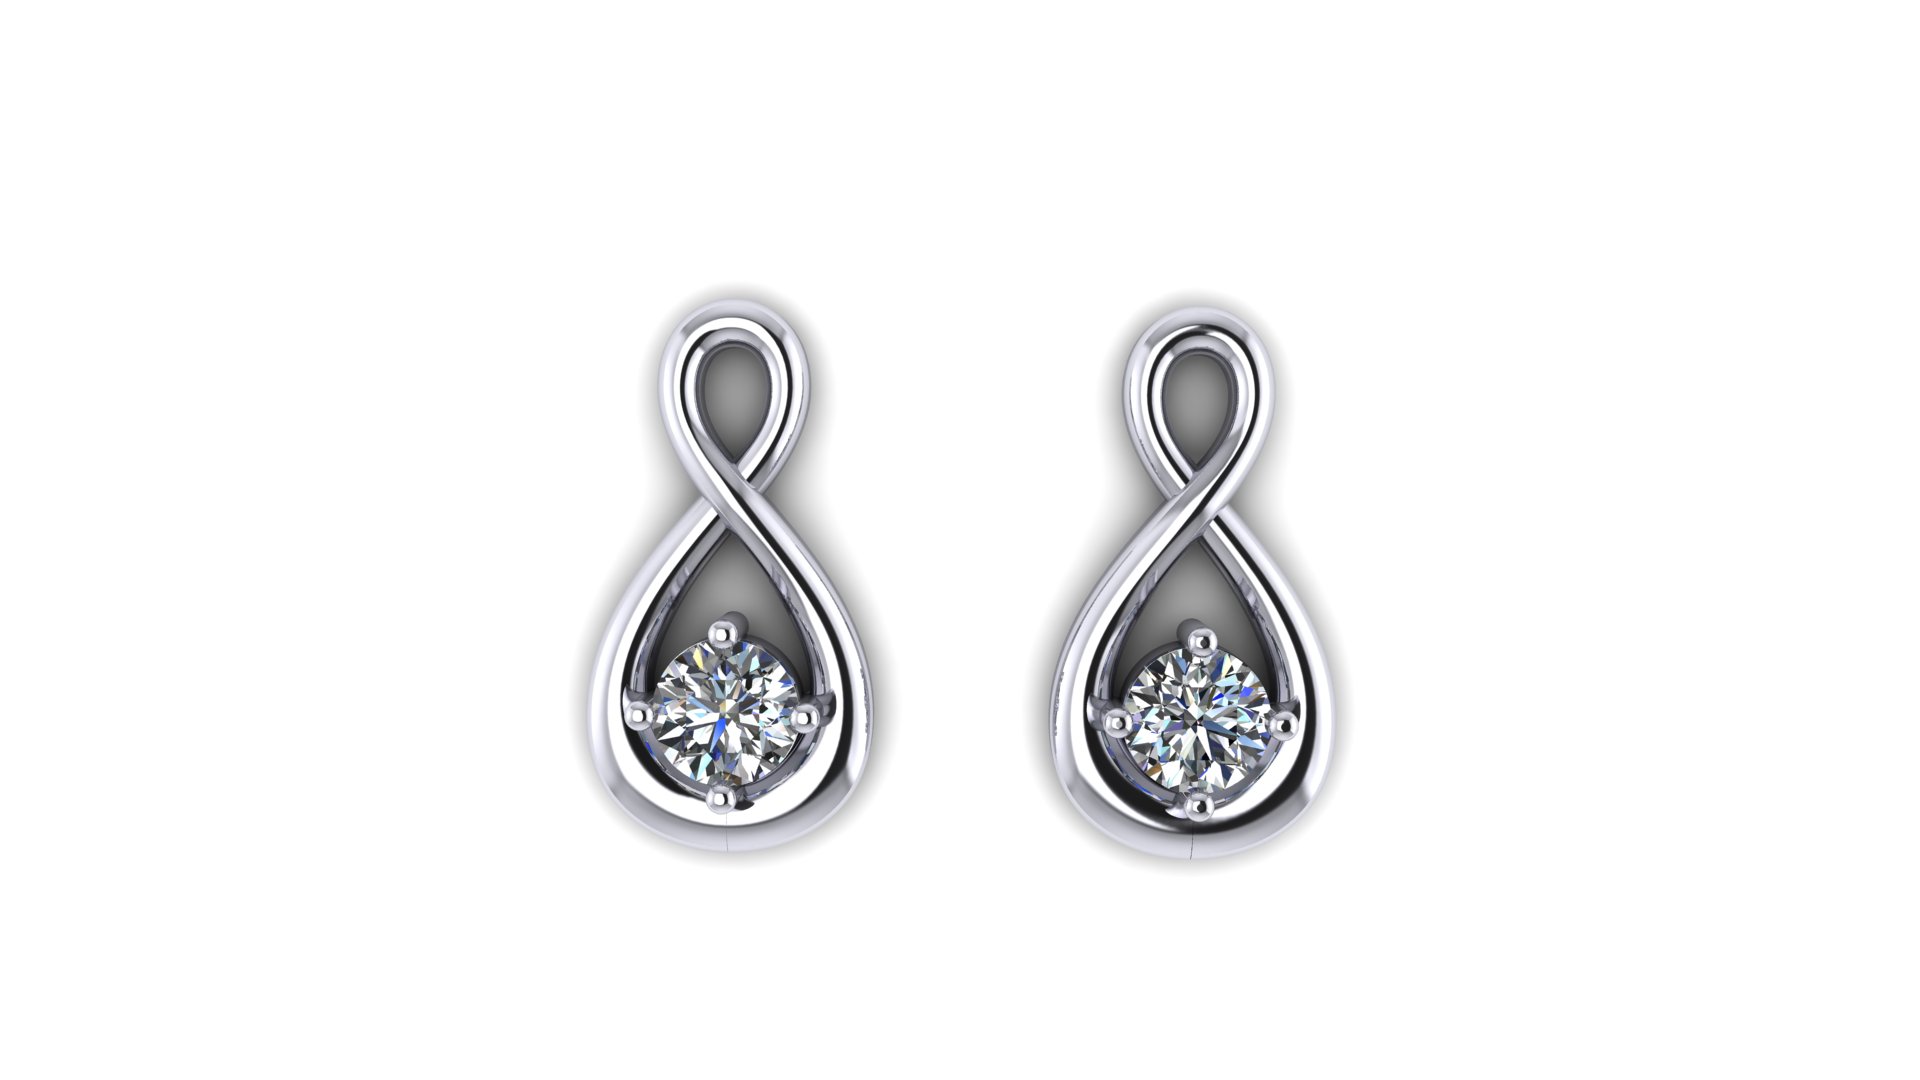 We Are One Of The Best Places To Buy Diamond Earrings